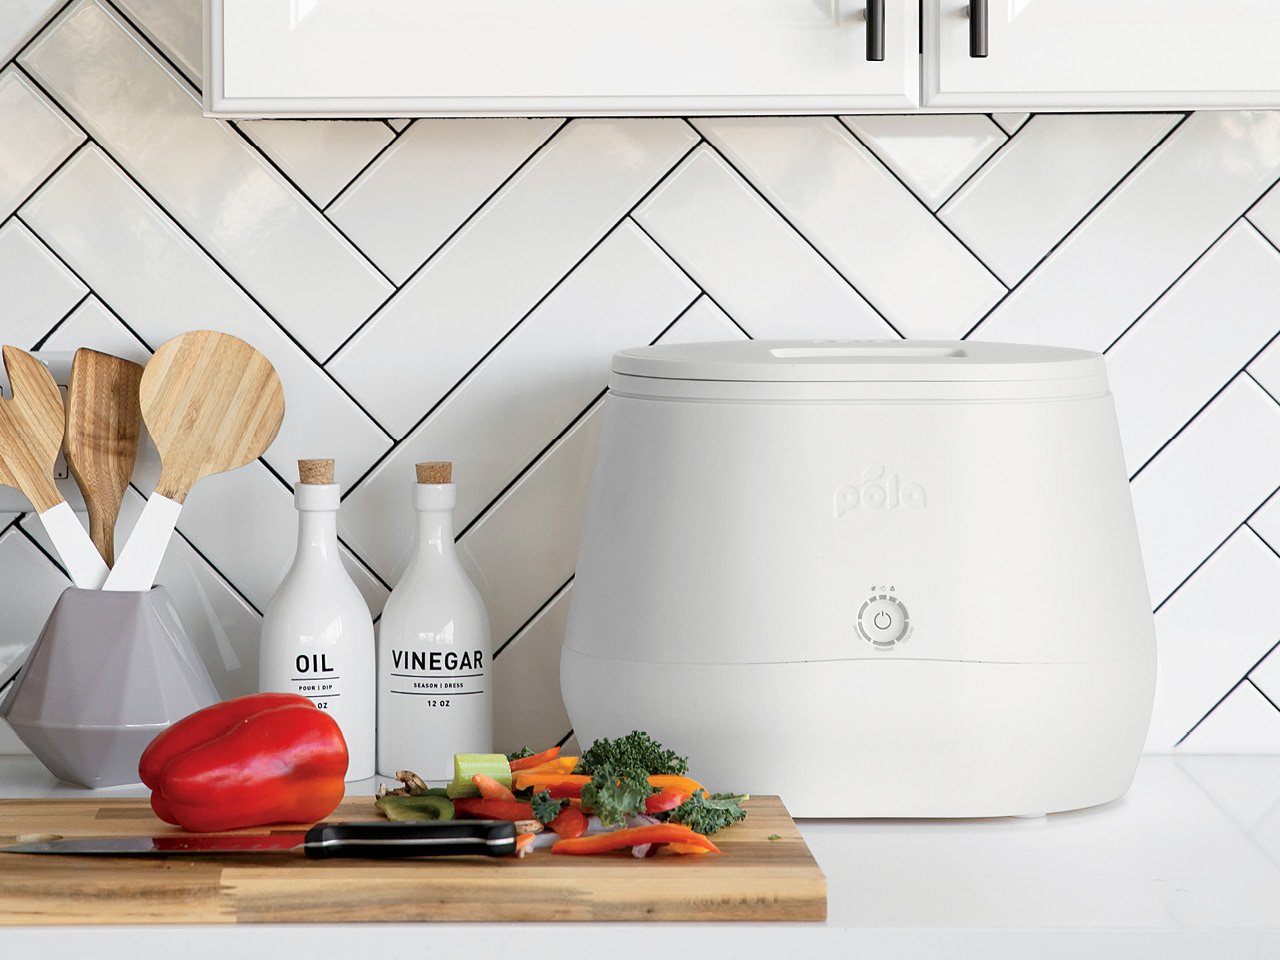 A white countertop composter from LOMI on a kitchen counter beside condiments, cooking tools, and a chopping board